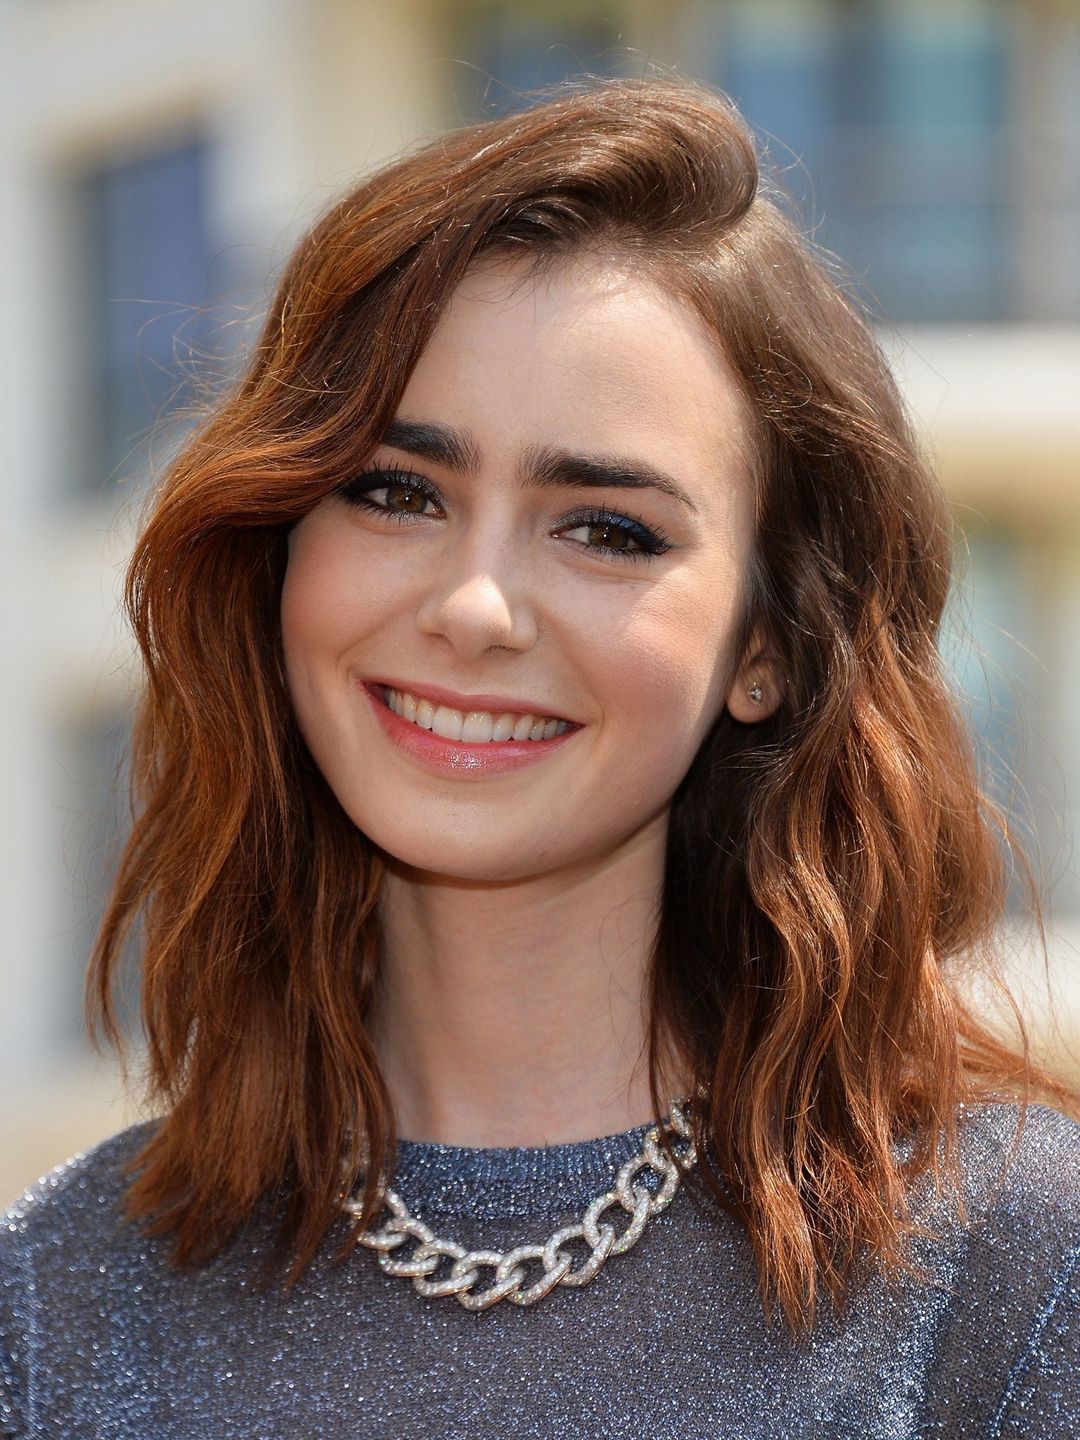 Lily Collins appearance